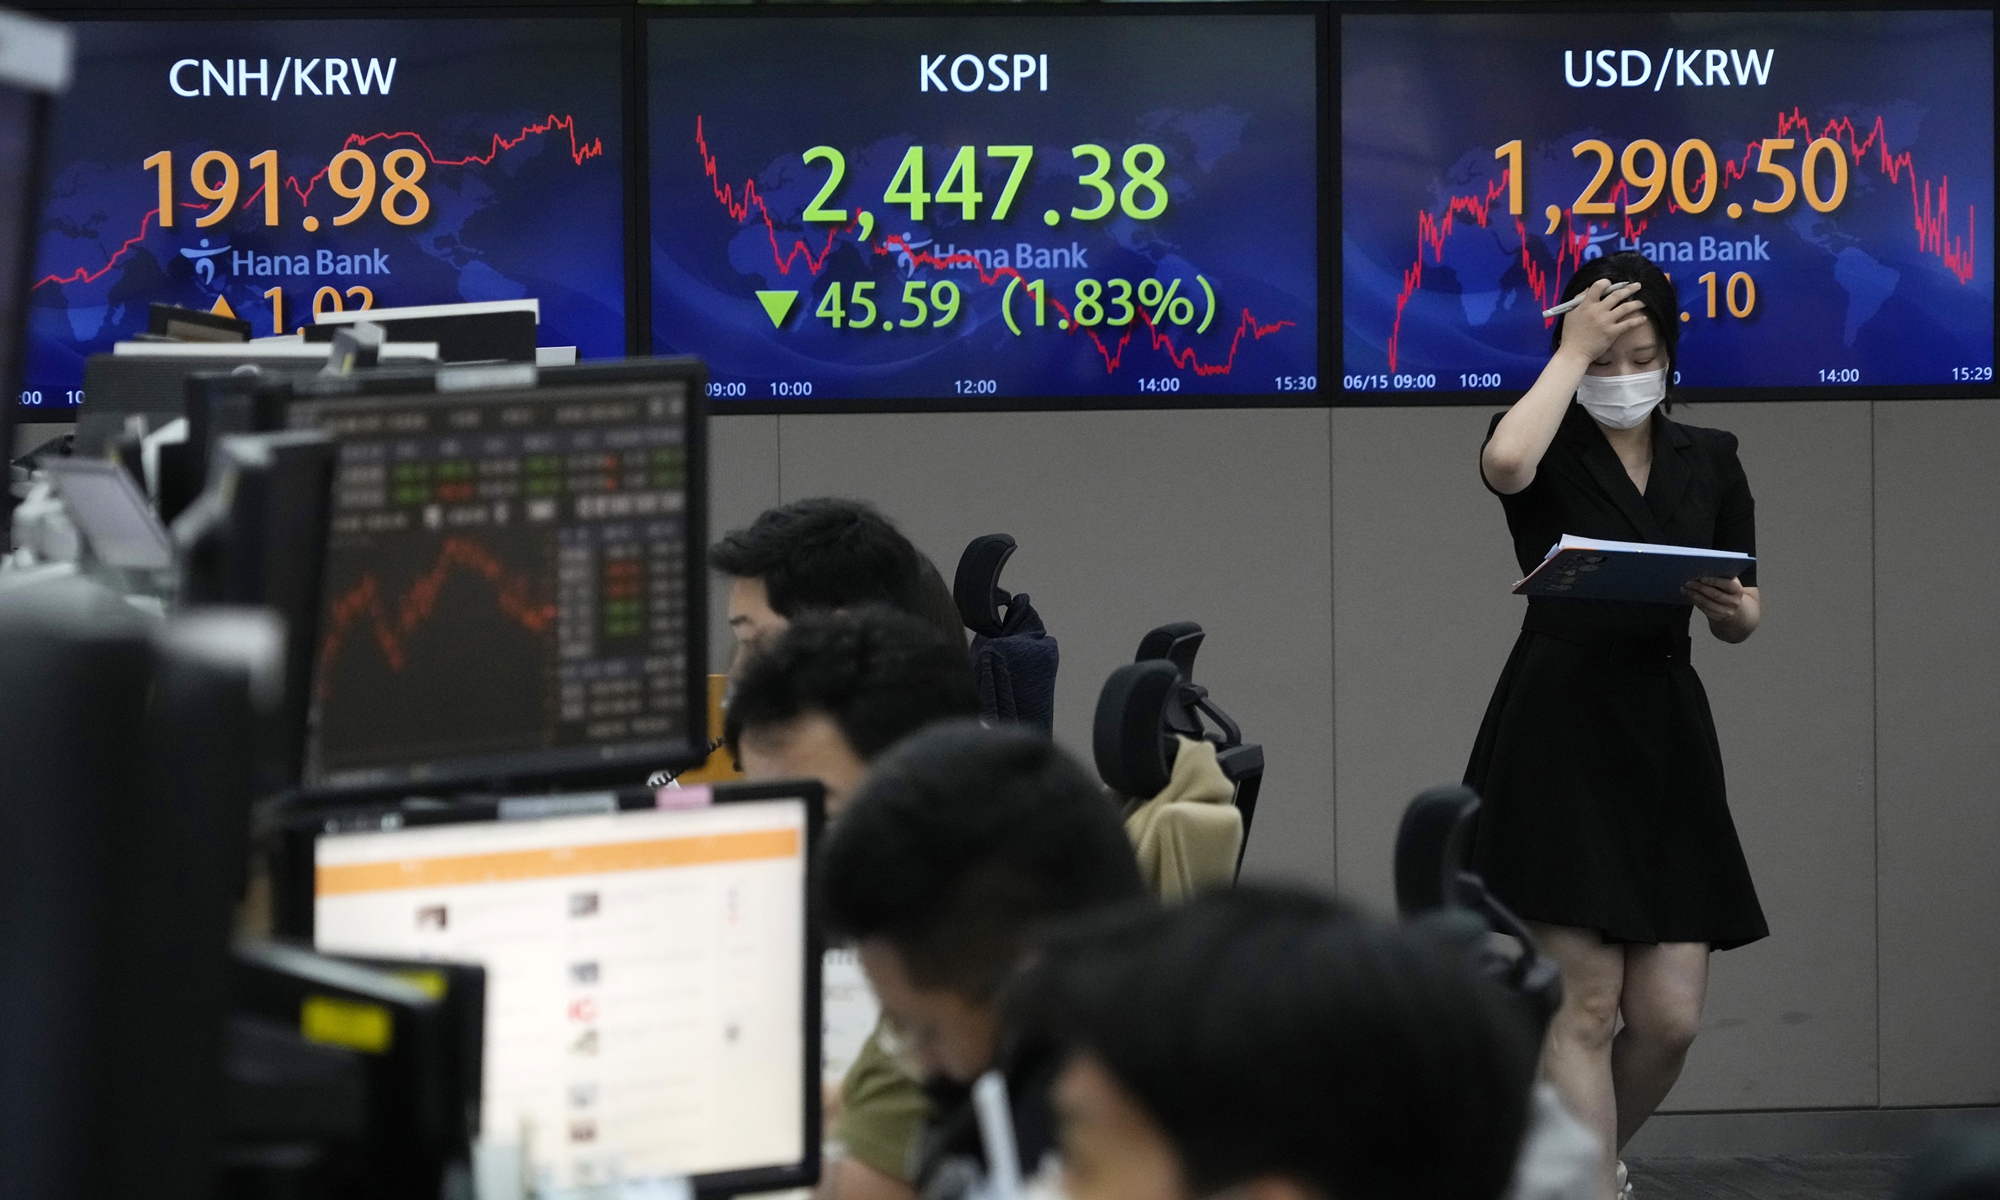 A currency trader passes by screens showing the Korea Composite Stock Price Index (KOSPI), center, and the exchange rate of South Korean won against the US dollar (right) at the foreign exchange dealing room of the KEB Hana Bank headquarters in Seoul on June 15, 2022. Asian stock markets were mixed on the day ahead of the Federal Reserve's announcement of how sharply it will raise interest rates to cool US inflation. Photo: VCG